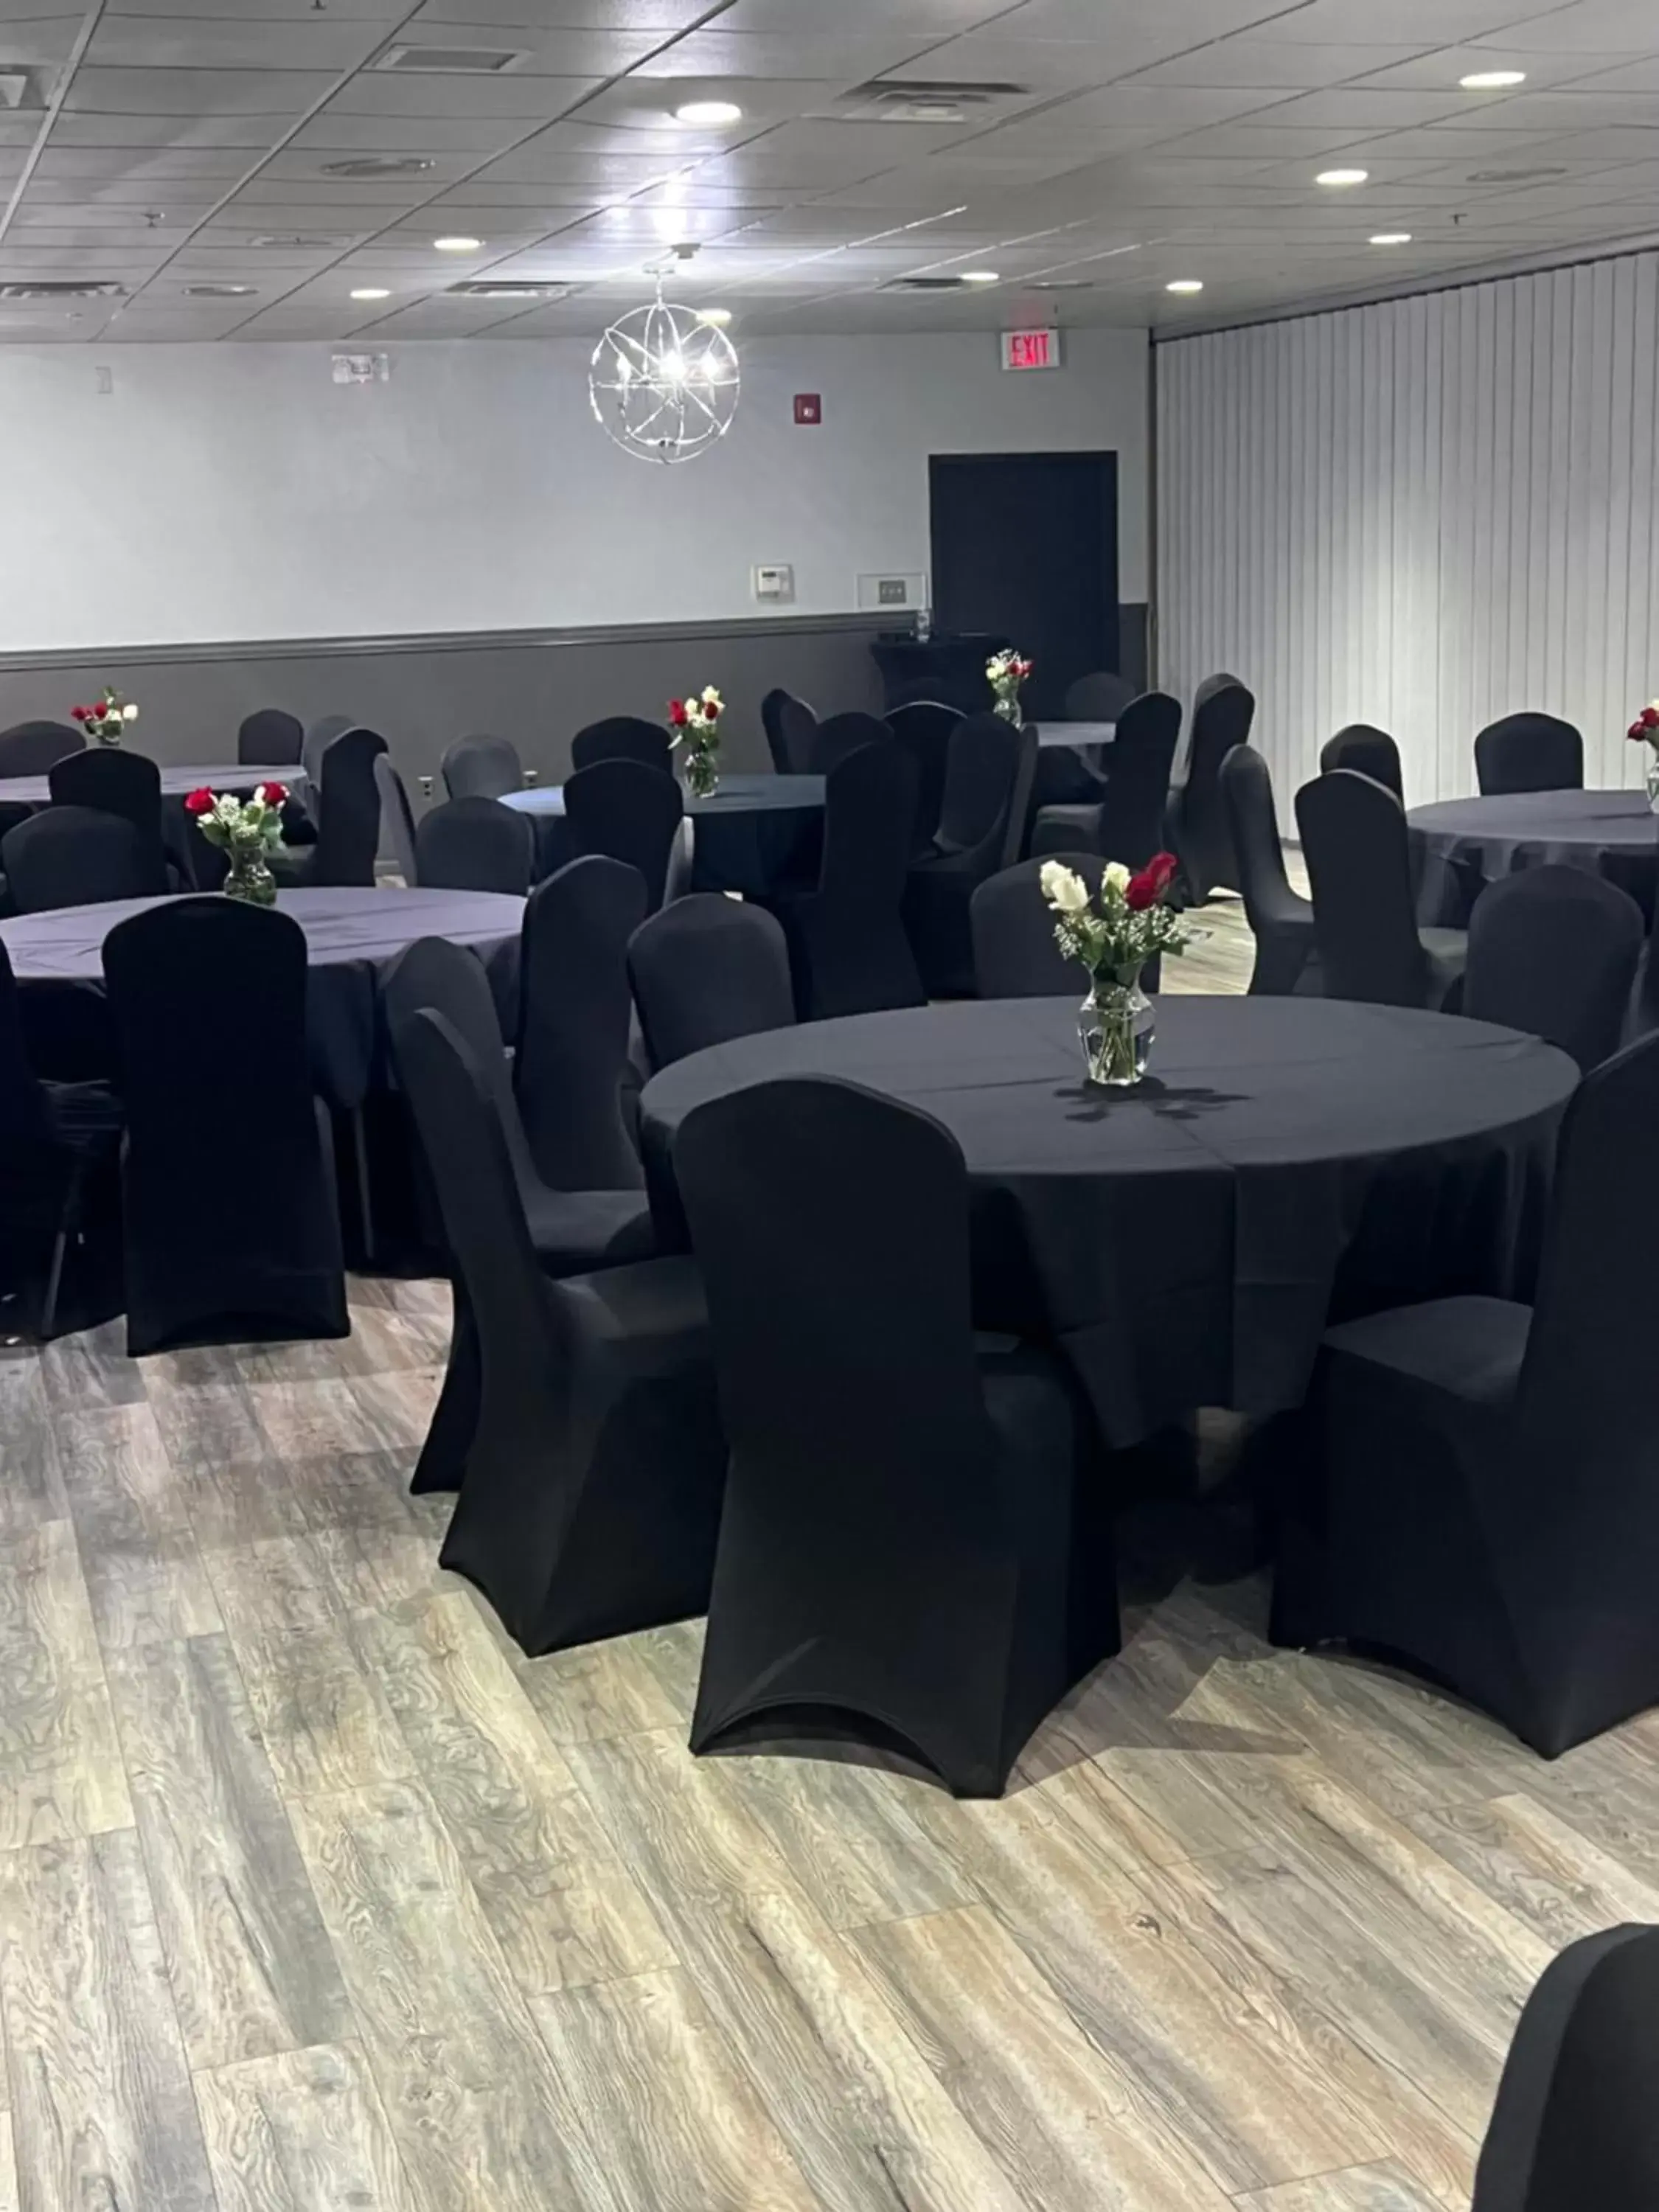 Meeting/conference room, Banquet Facilities in Harbor Shores on Lake Geneva